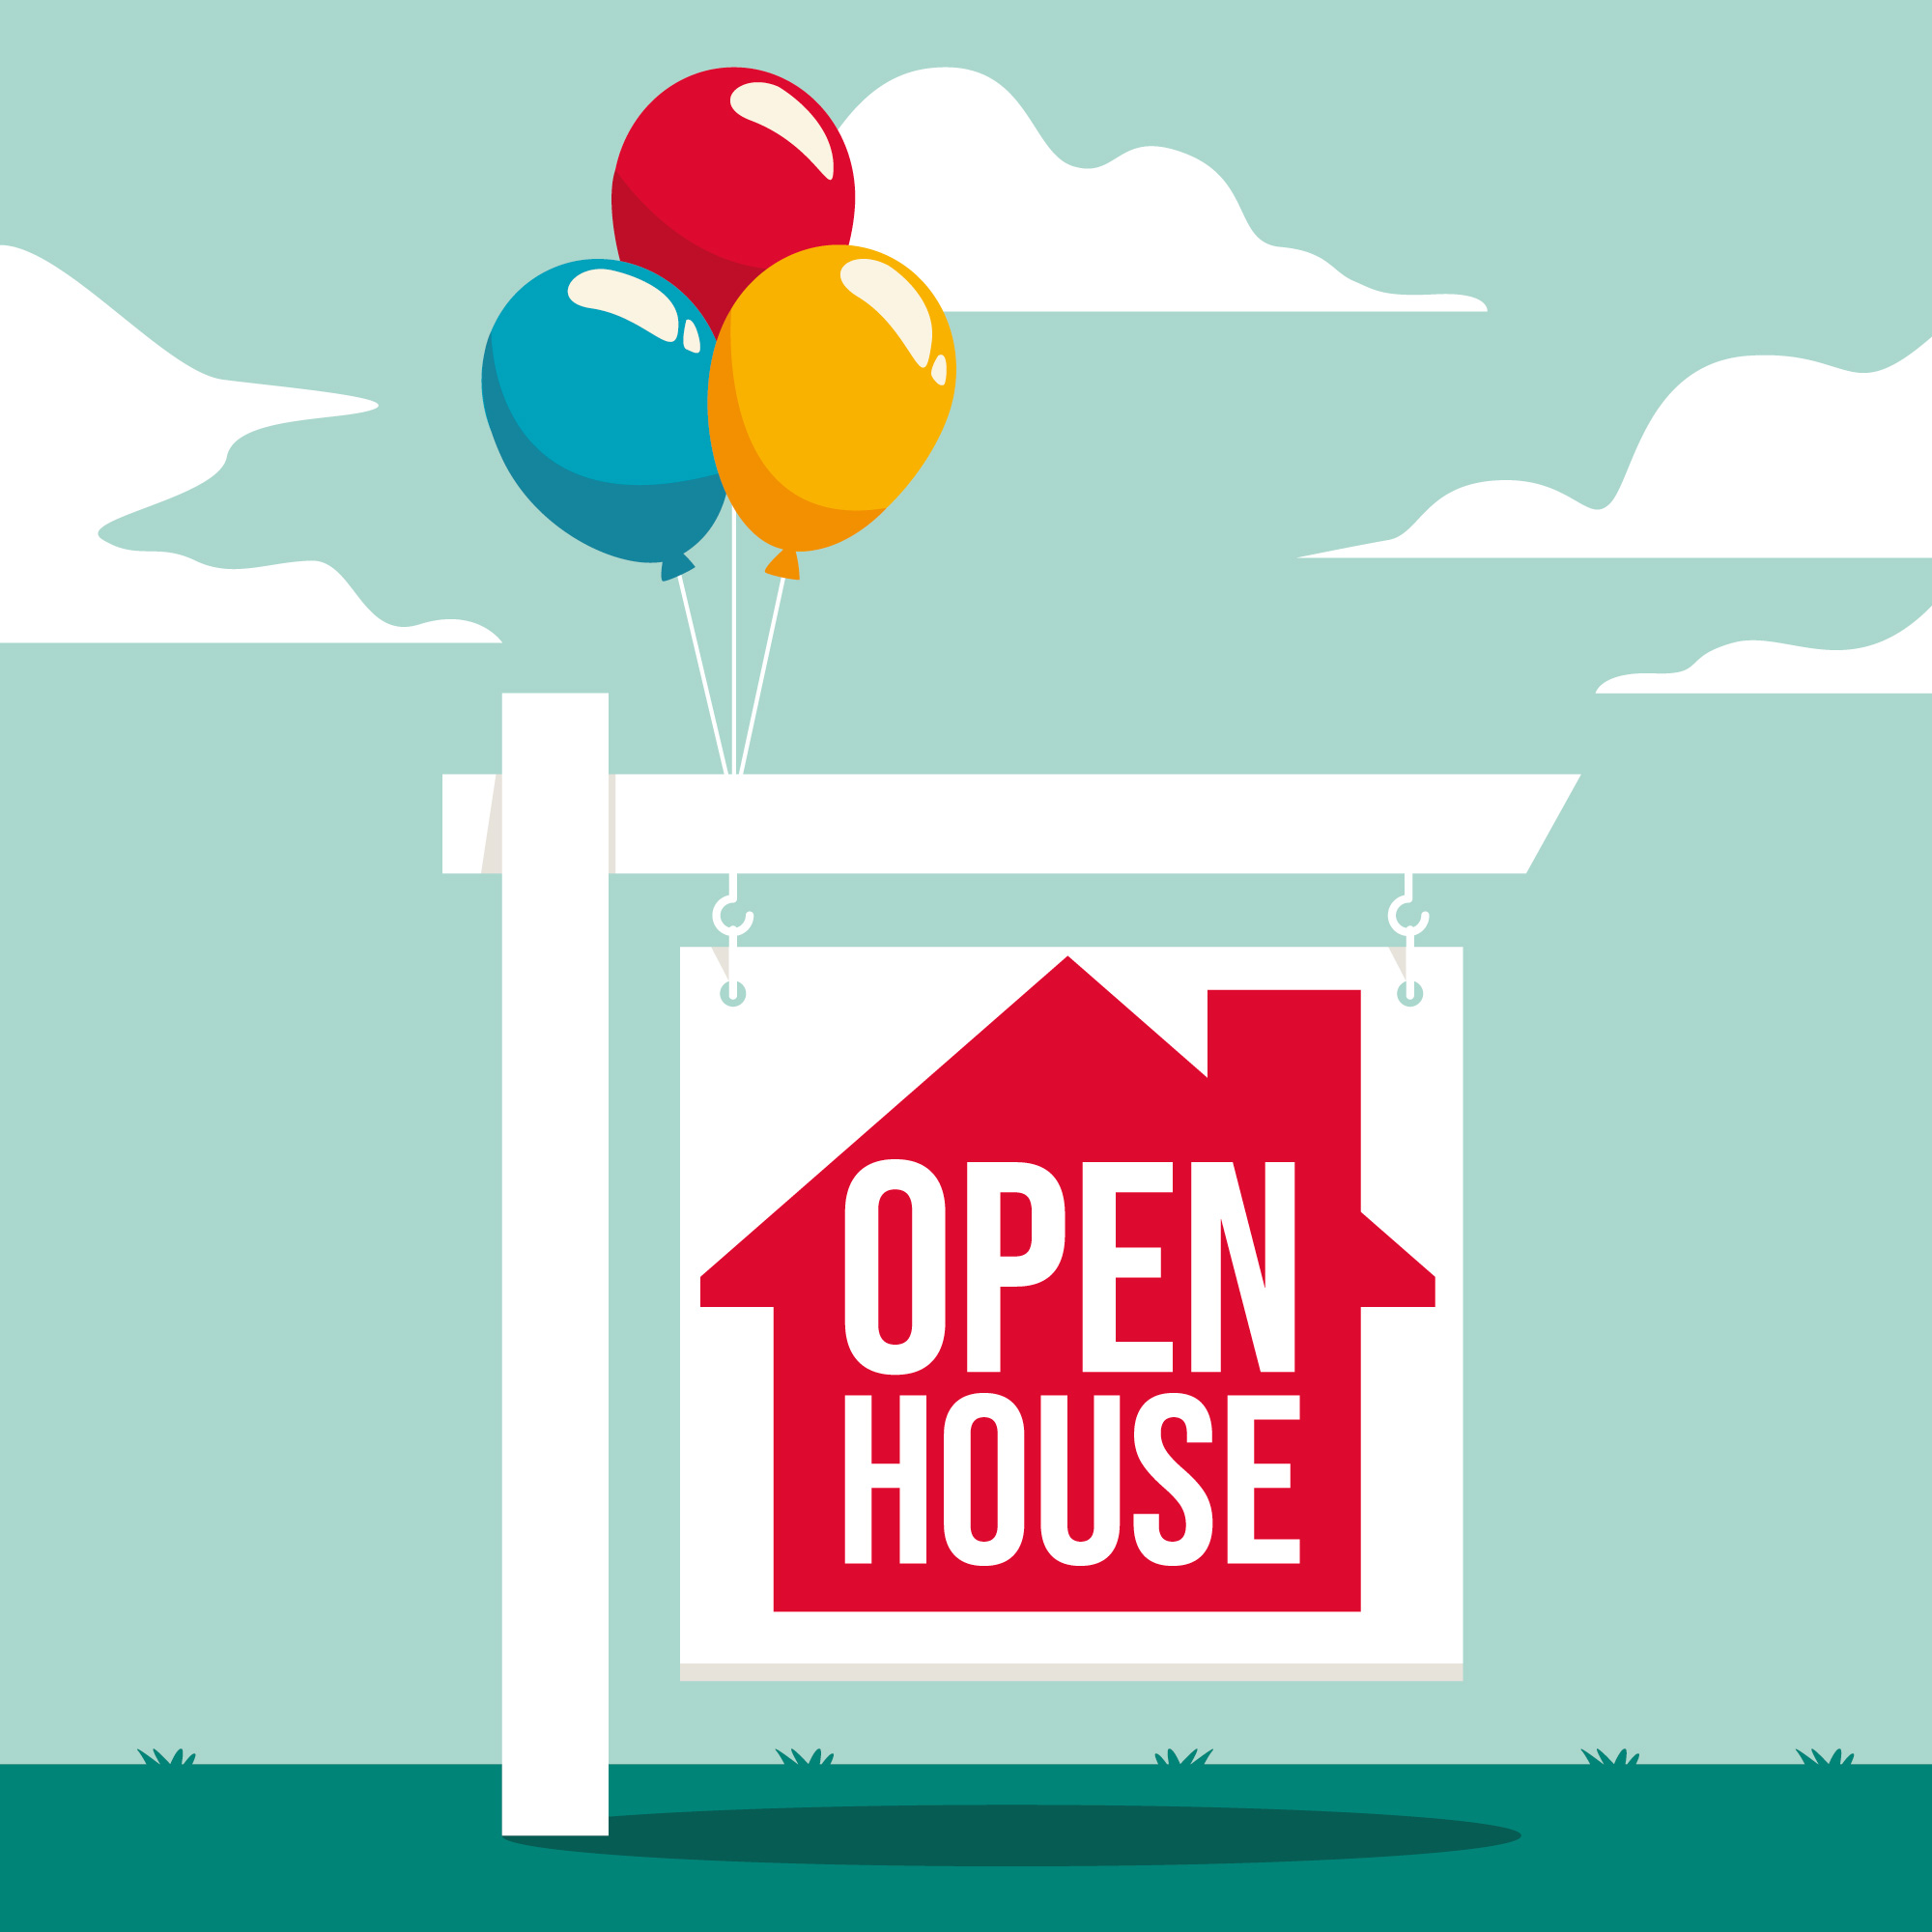 Tips For Hosting a Successful Open House